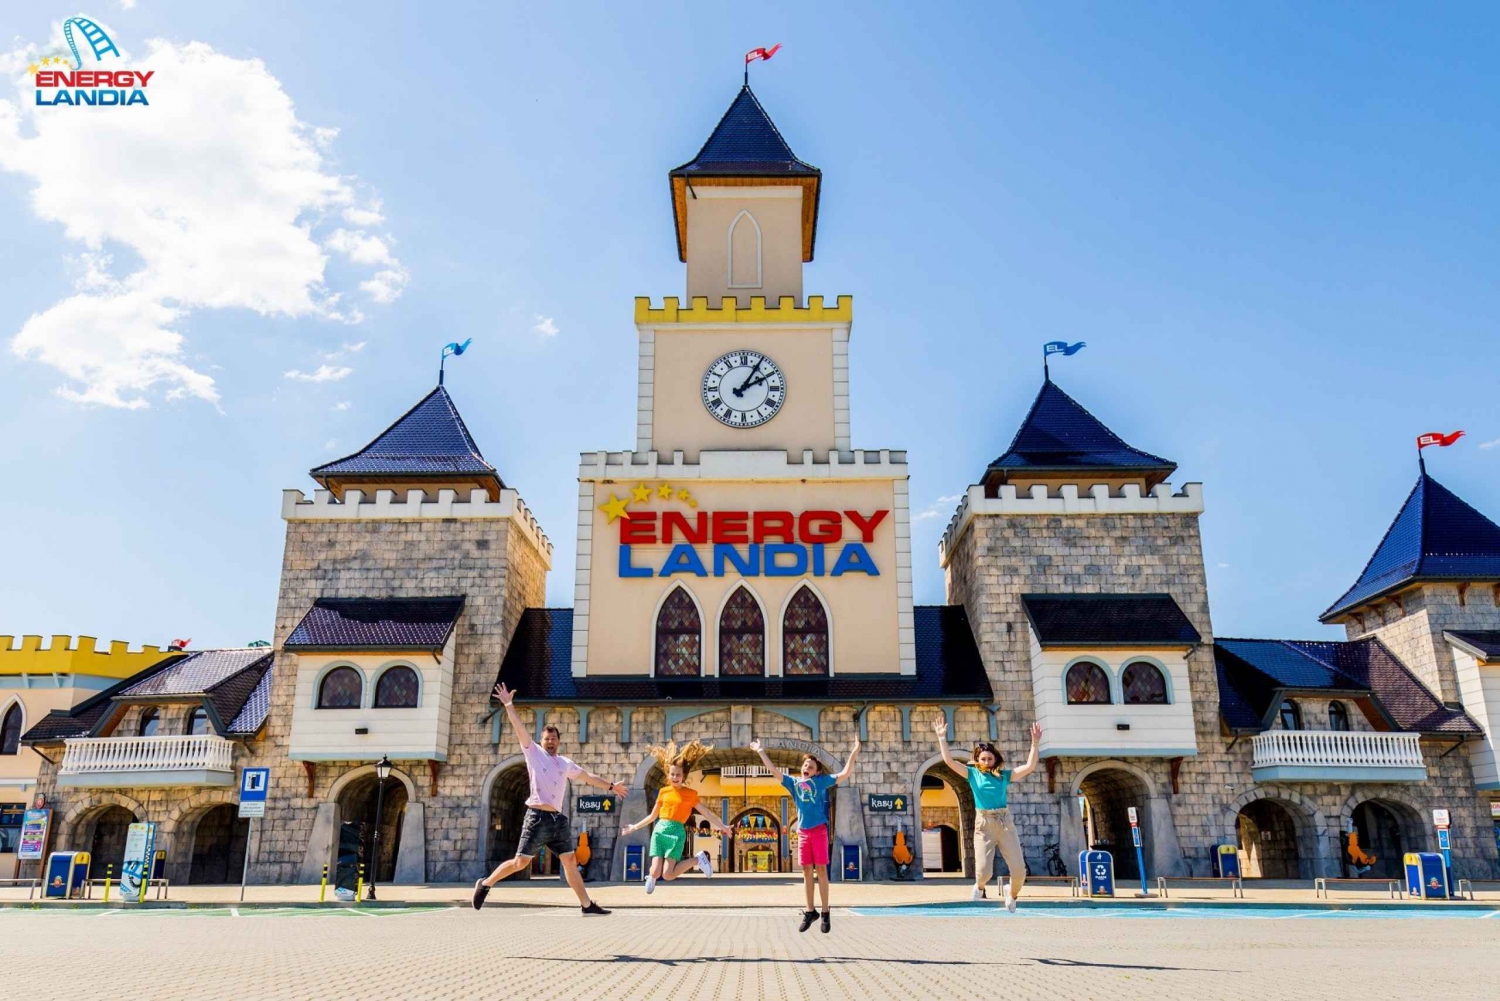 From Krakow: Entry Ticket to Energylandia with Transfer